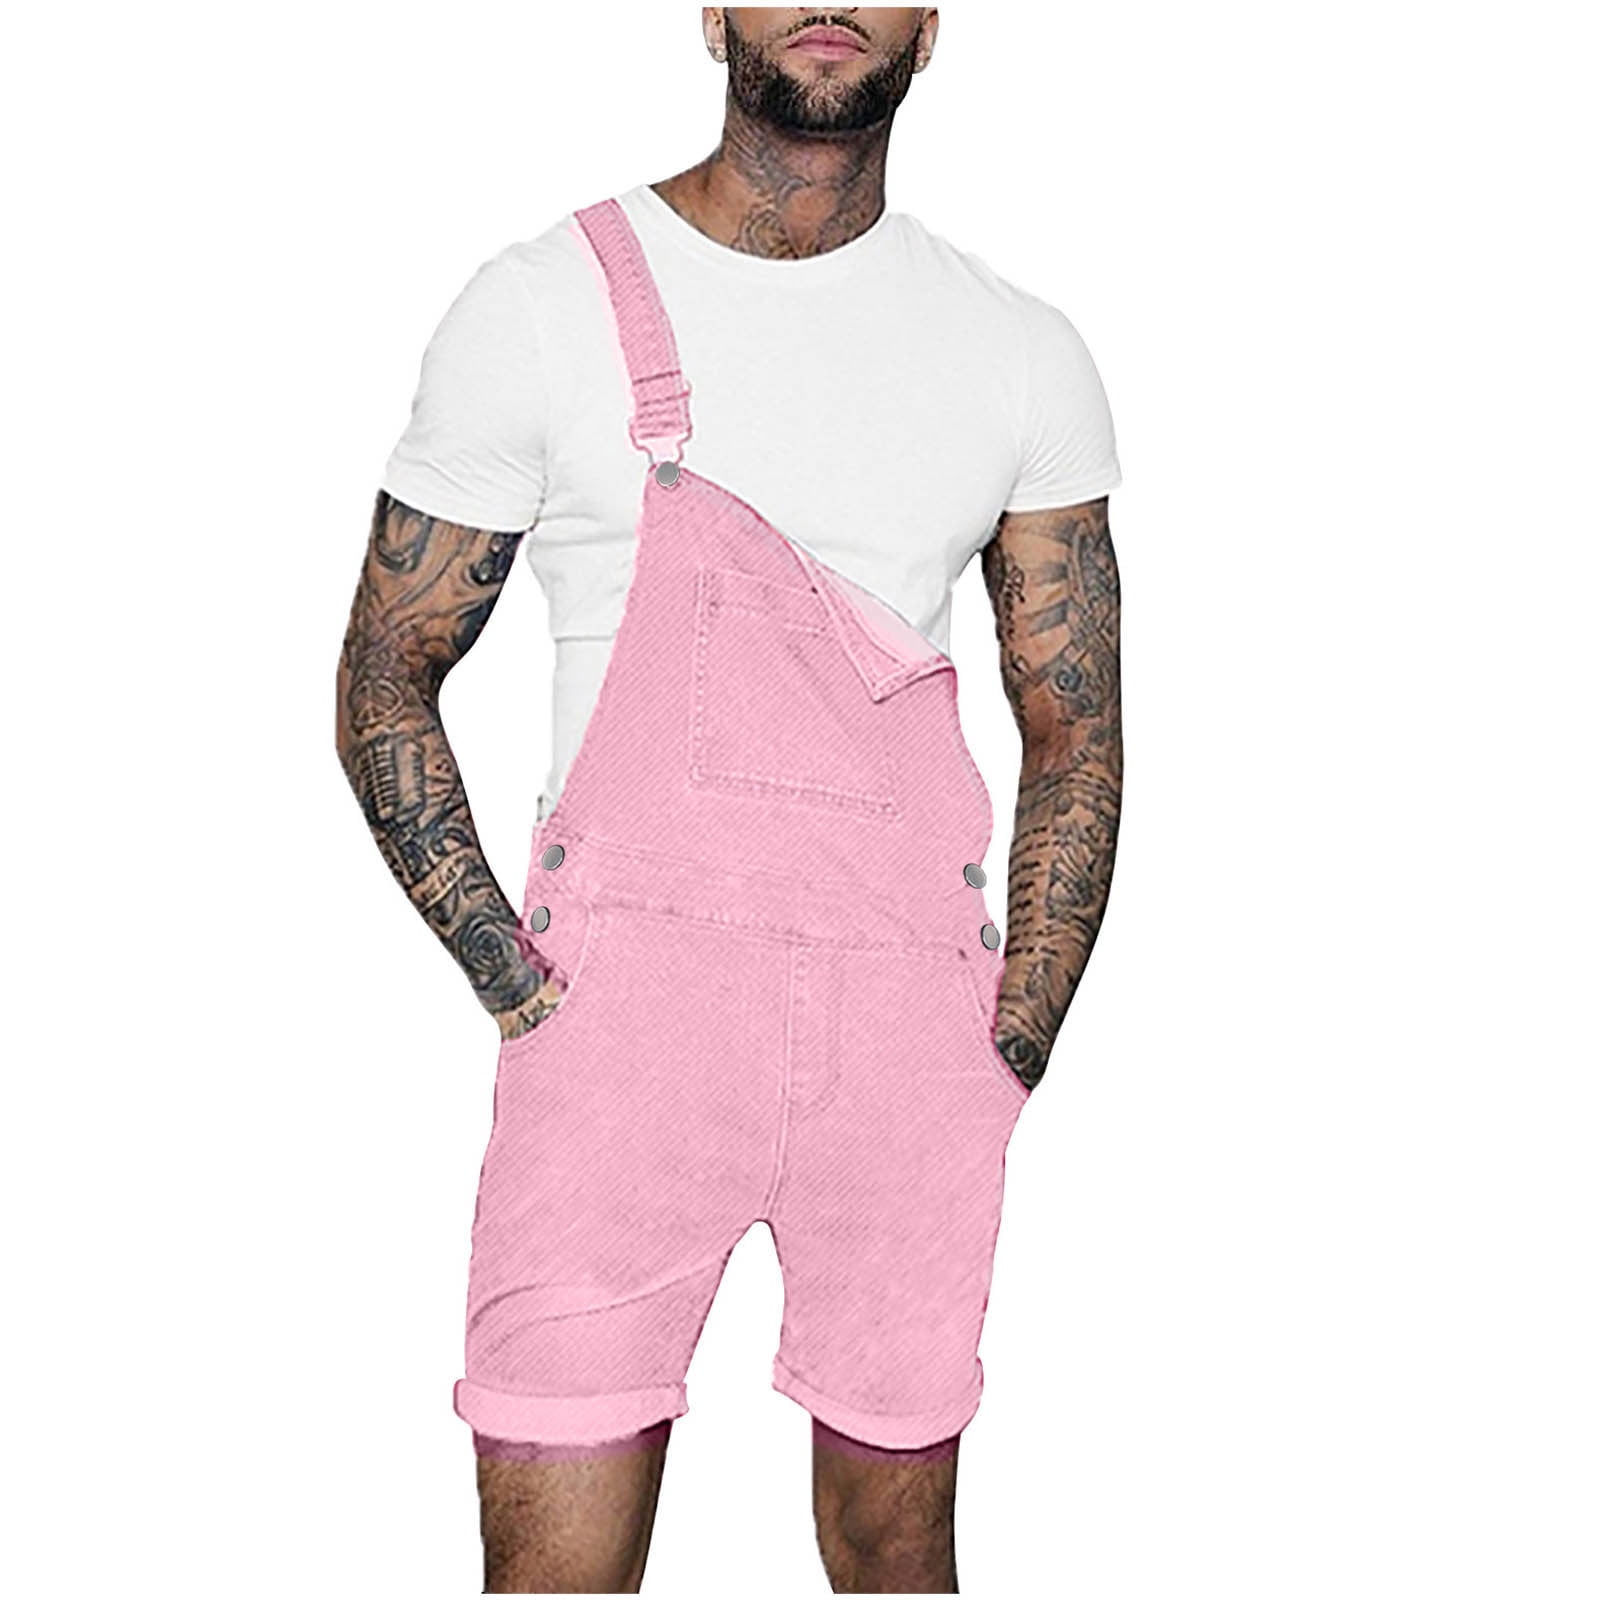 Clearance RYRJJ Mens Denim Bib Overall Shorts Above Knee Length Rompers  Walk Dungaree Jumpsuit Relaxed Fit(Pink,XL) 